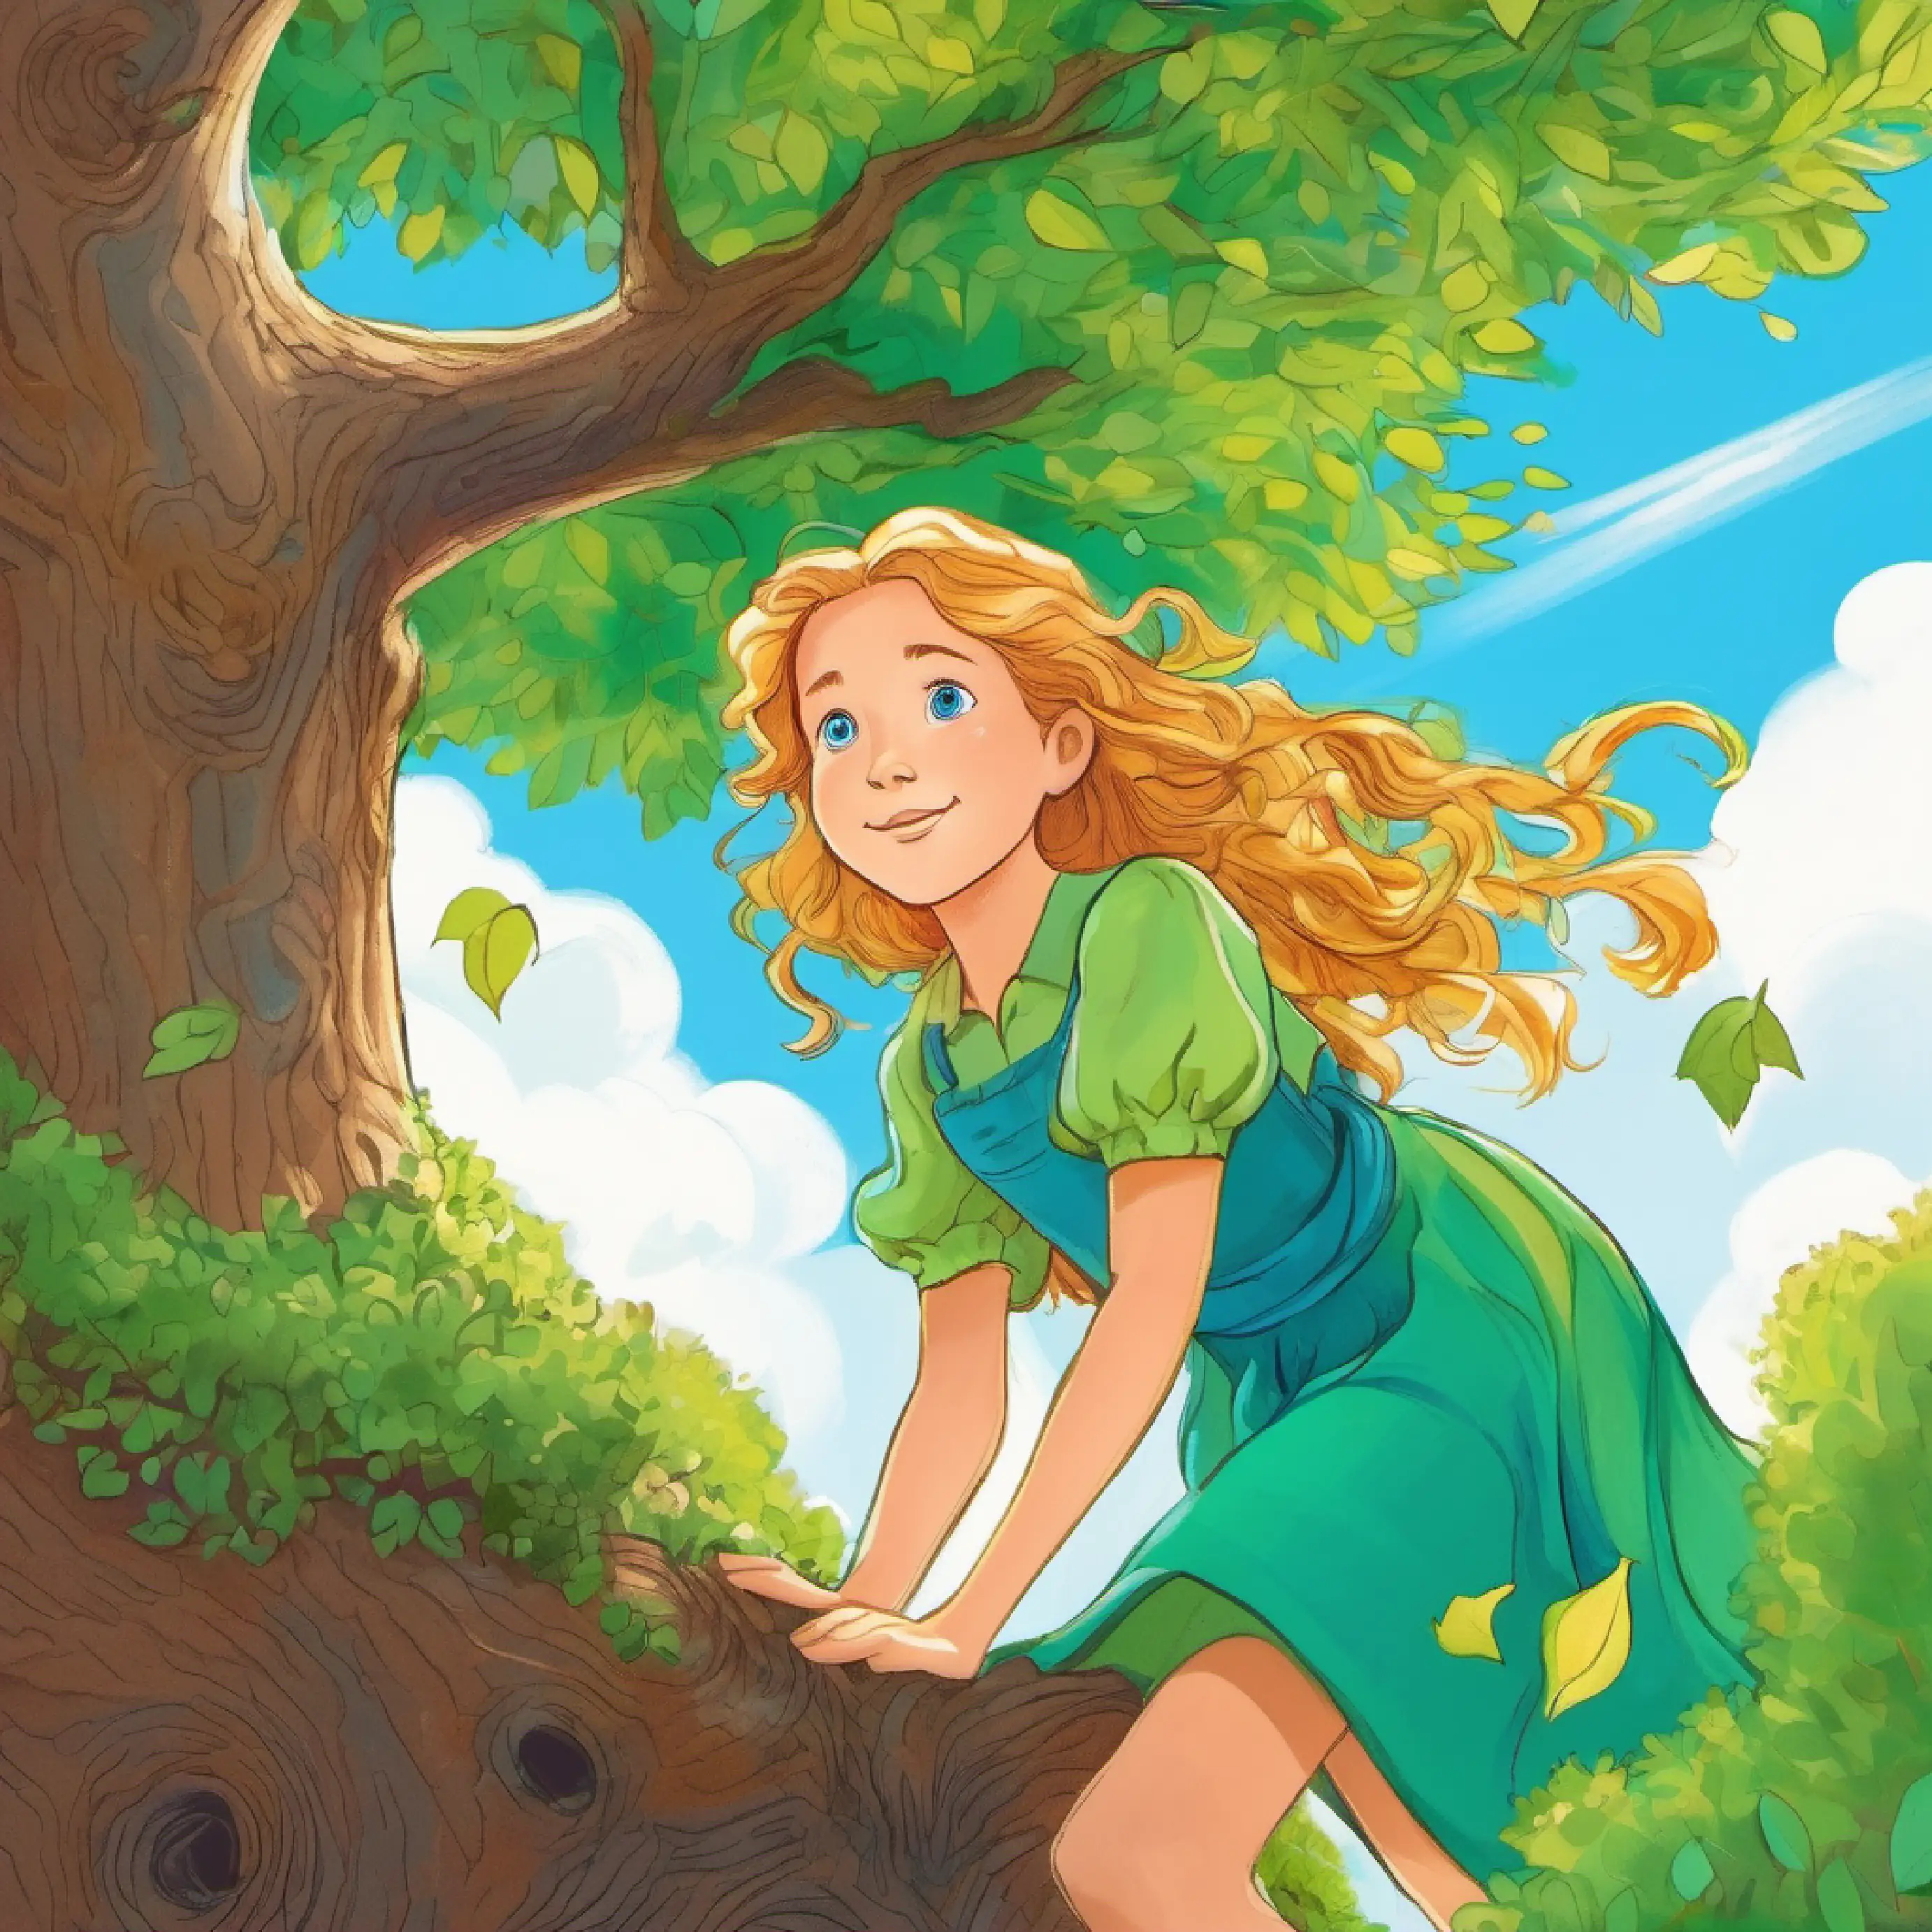 Girl with sunny hair, full of hope, bright blue eyes, wears a green dress about to start climbing the oak tree.